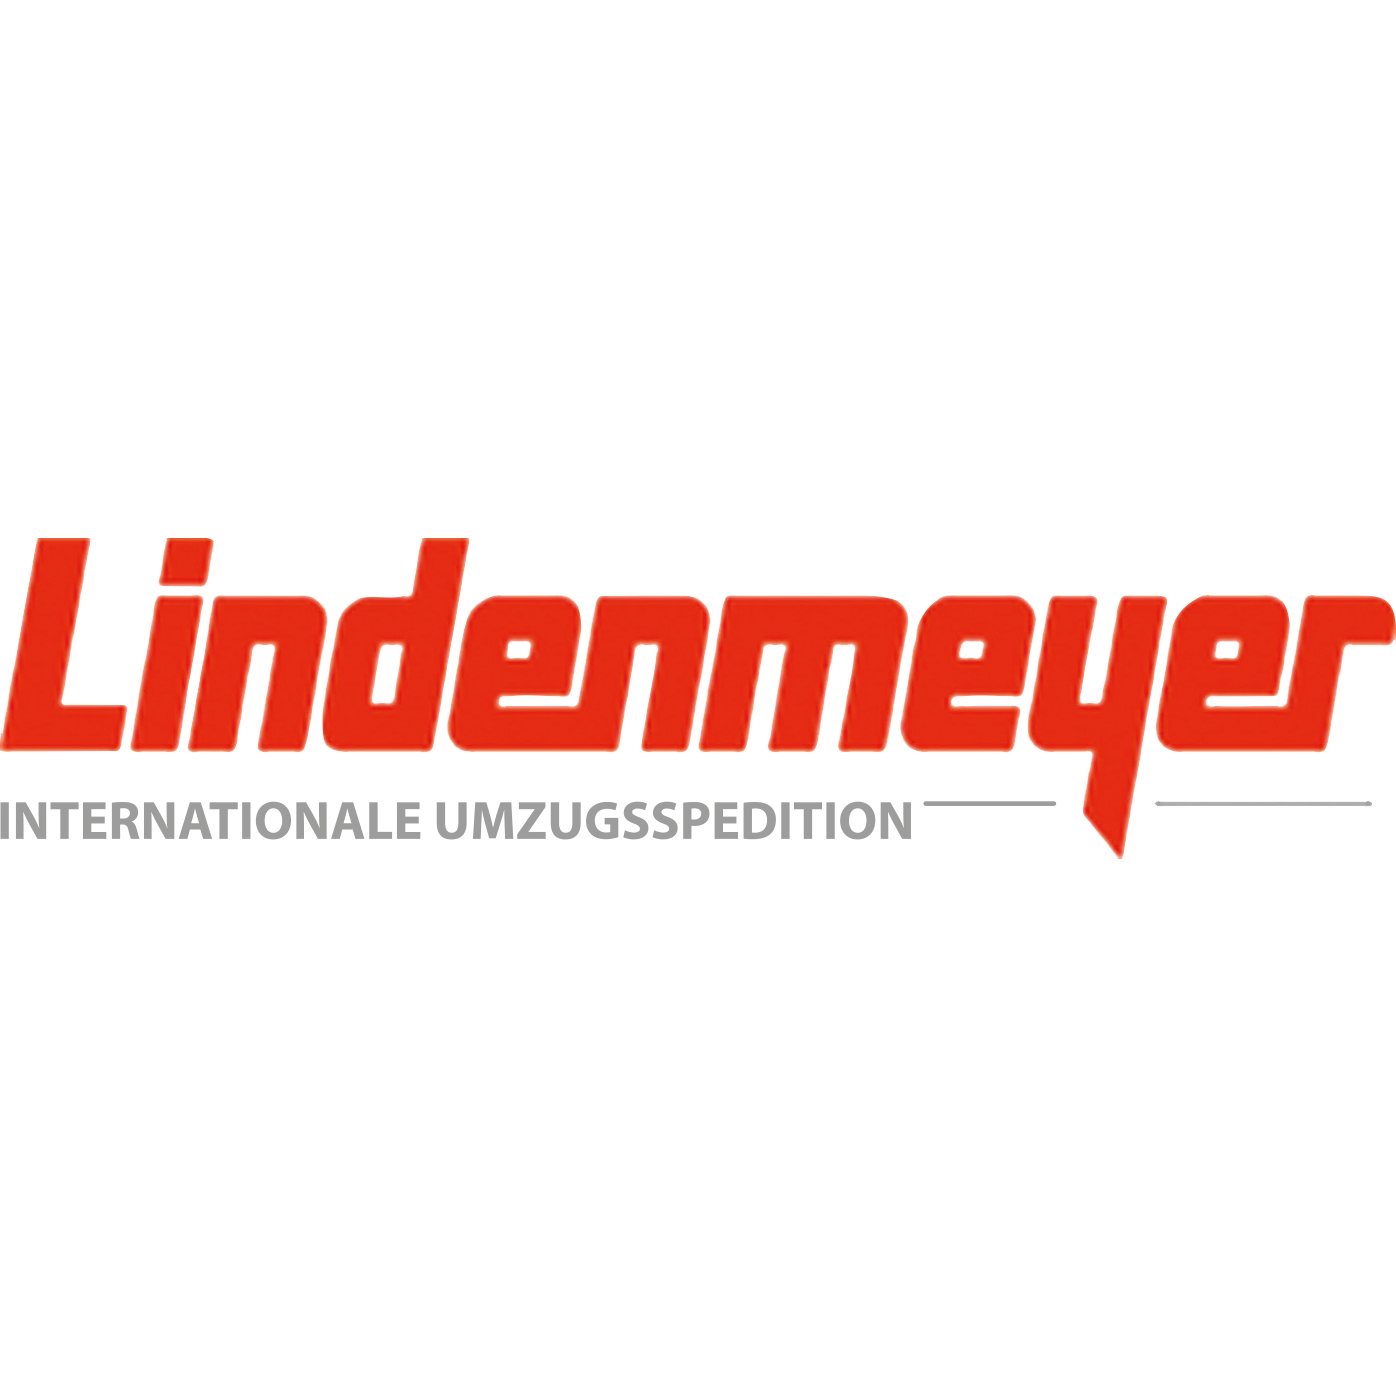 Spedition Lindenmeyer GmbH & Co. KG in Ansbach - Logo